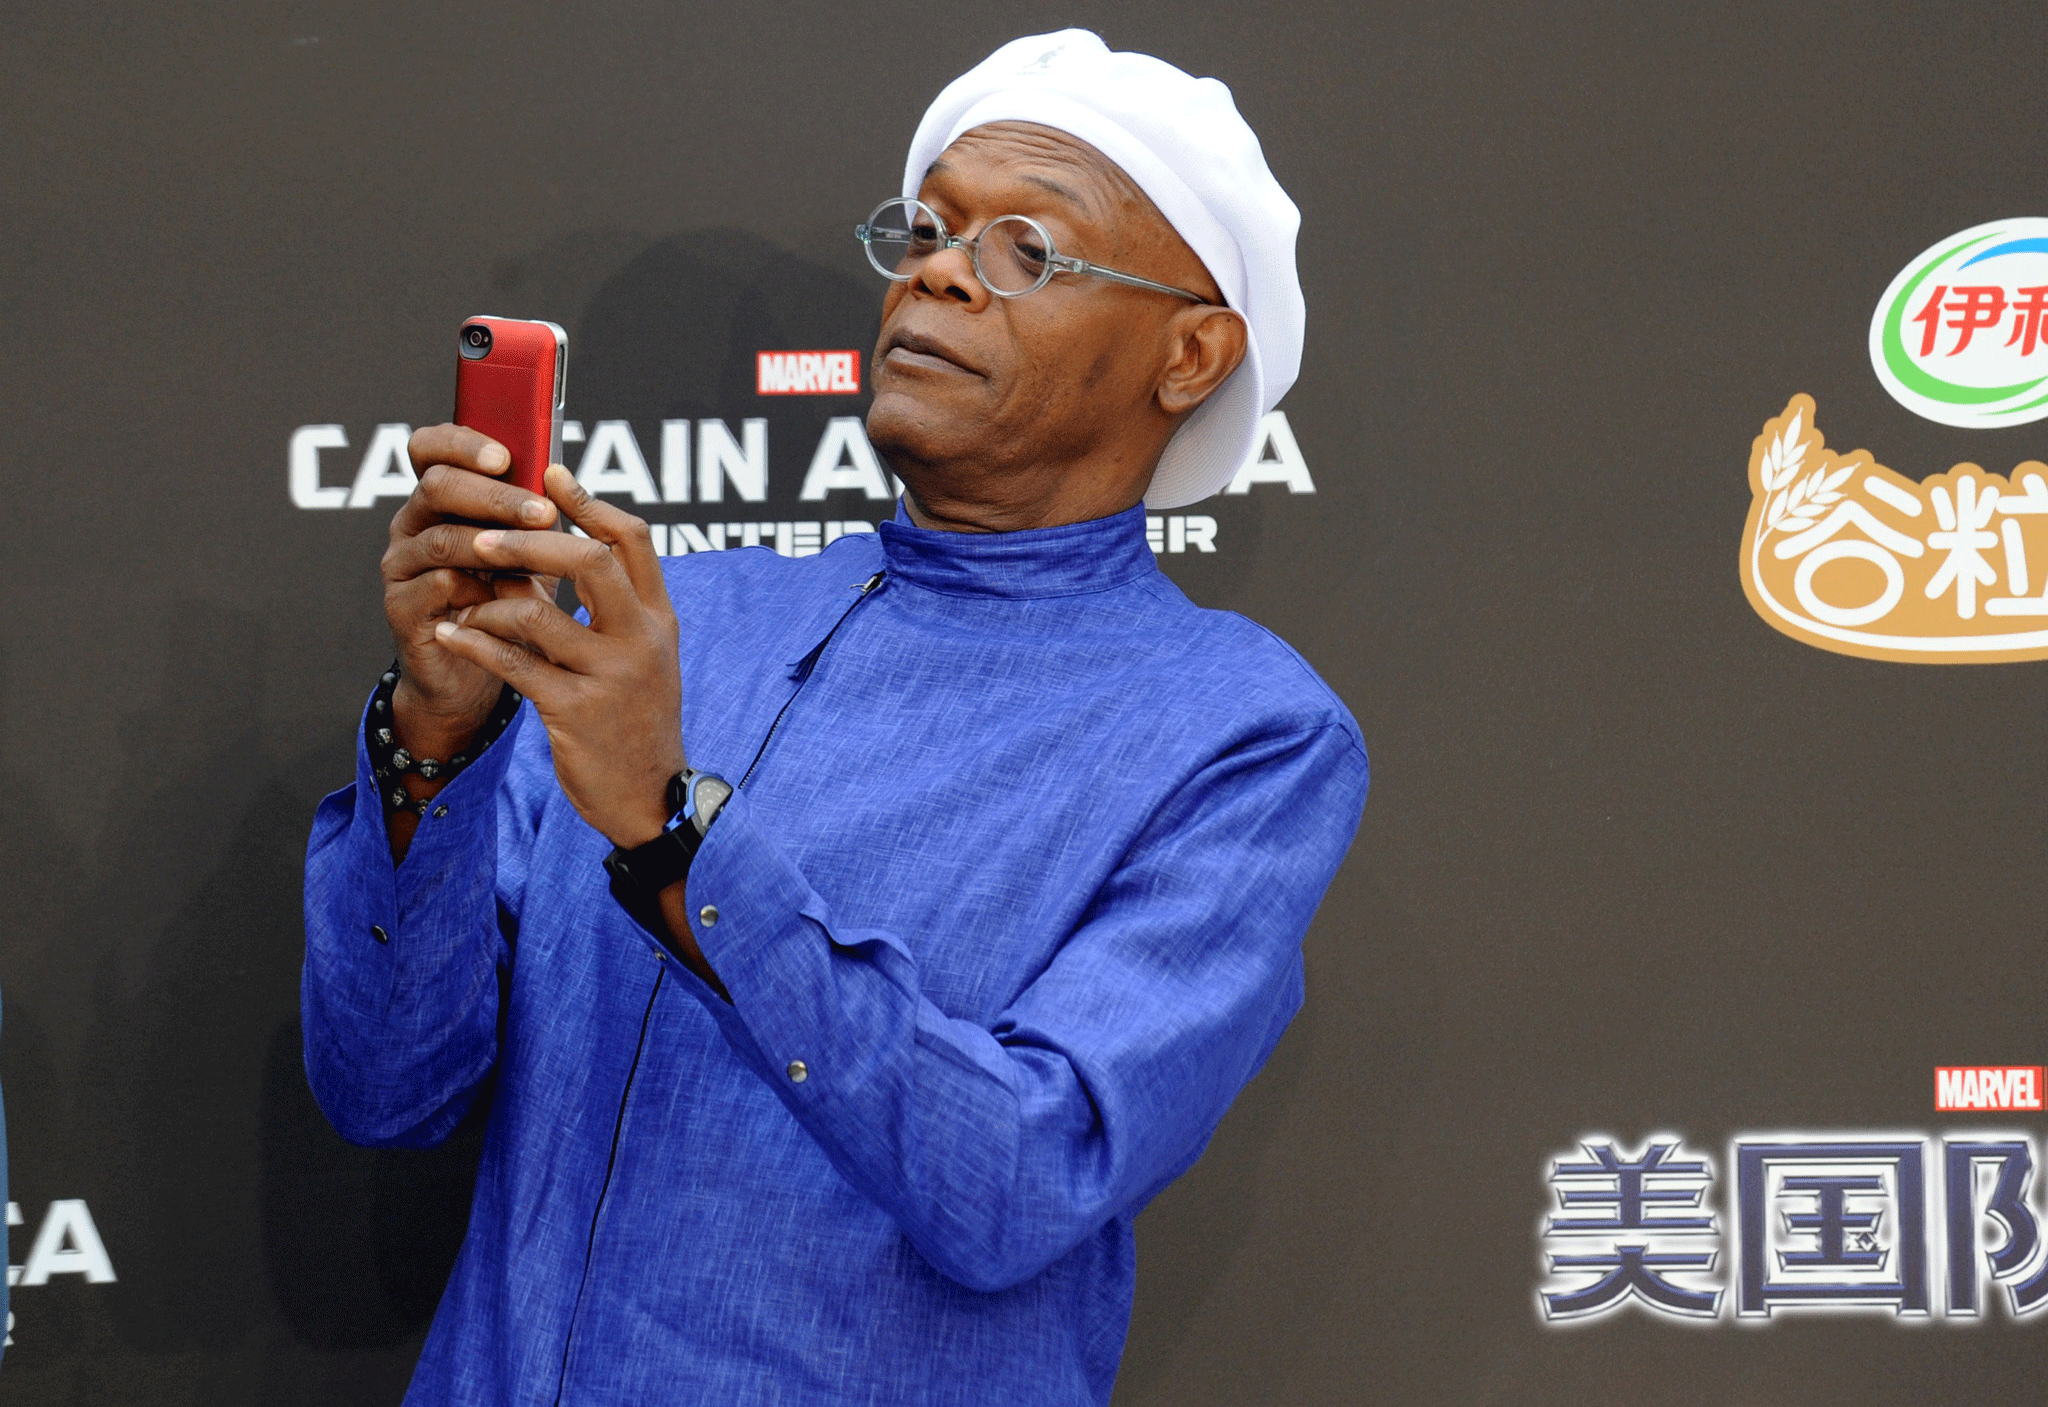 Samuel L Jackson got inventive with his answers during latest comic book movie promo tour